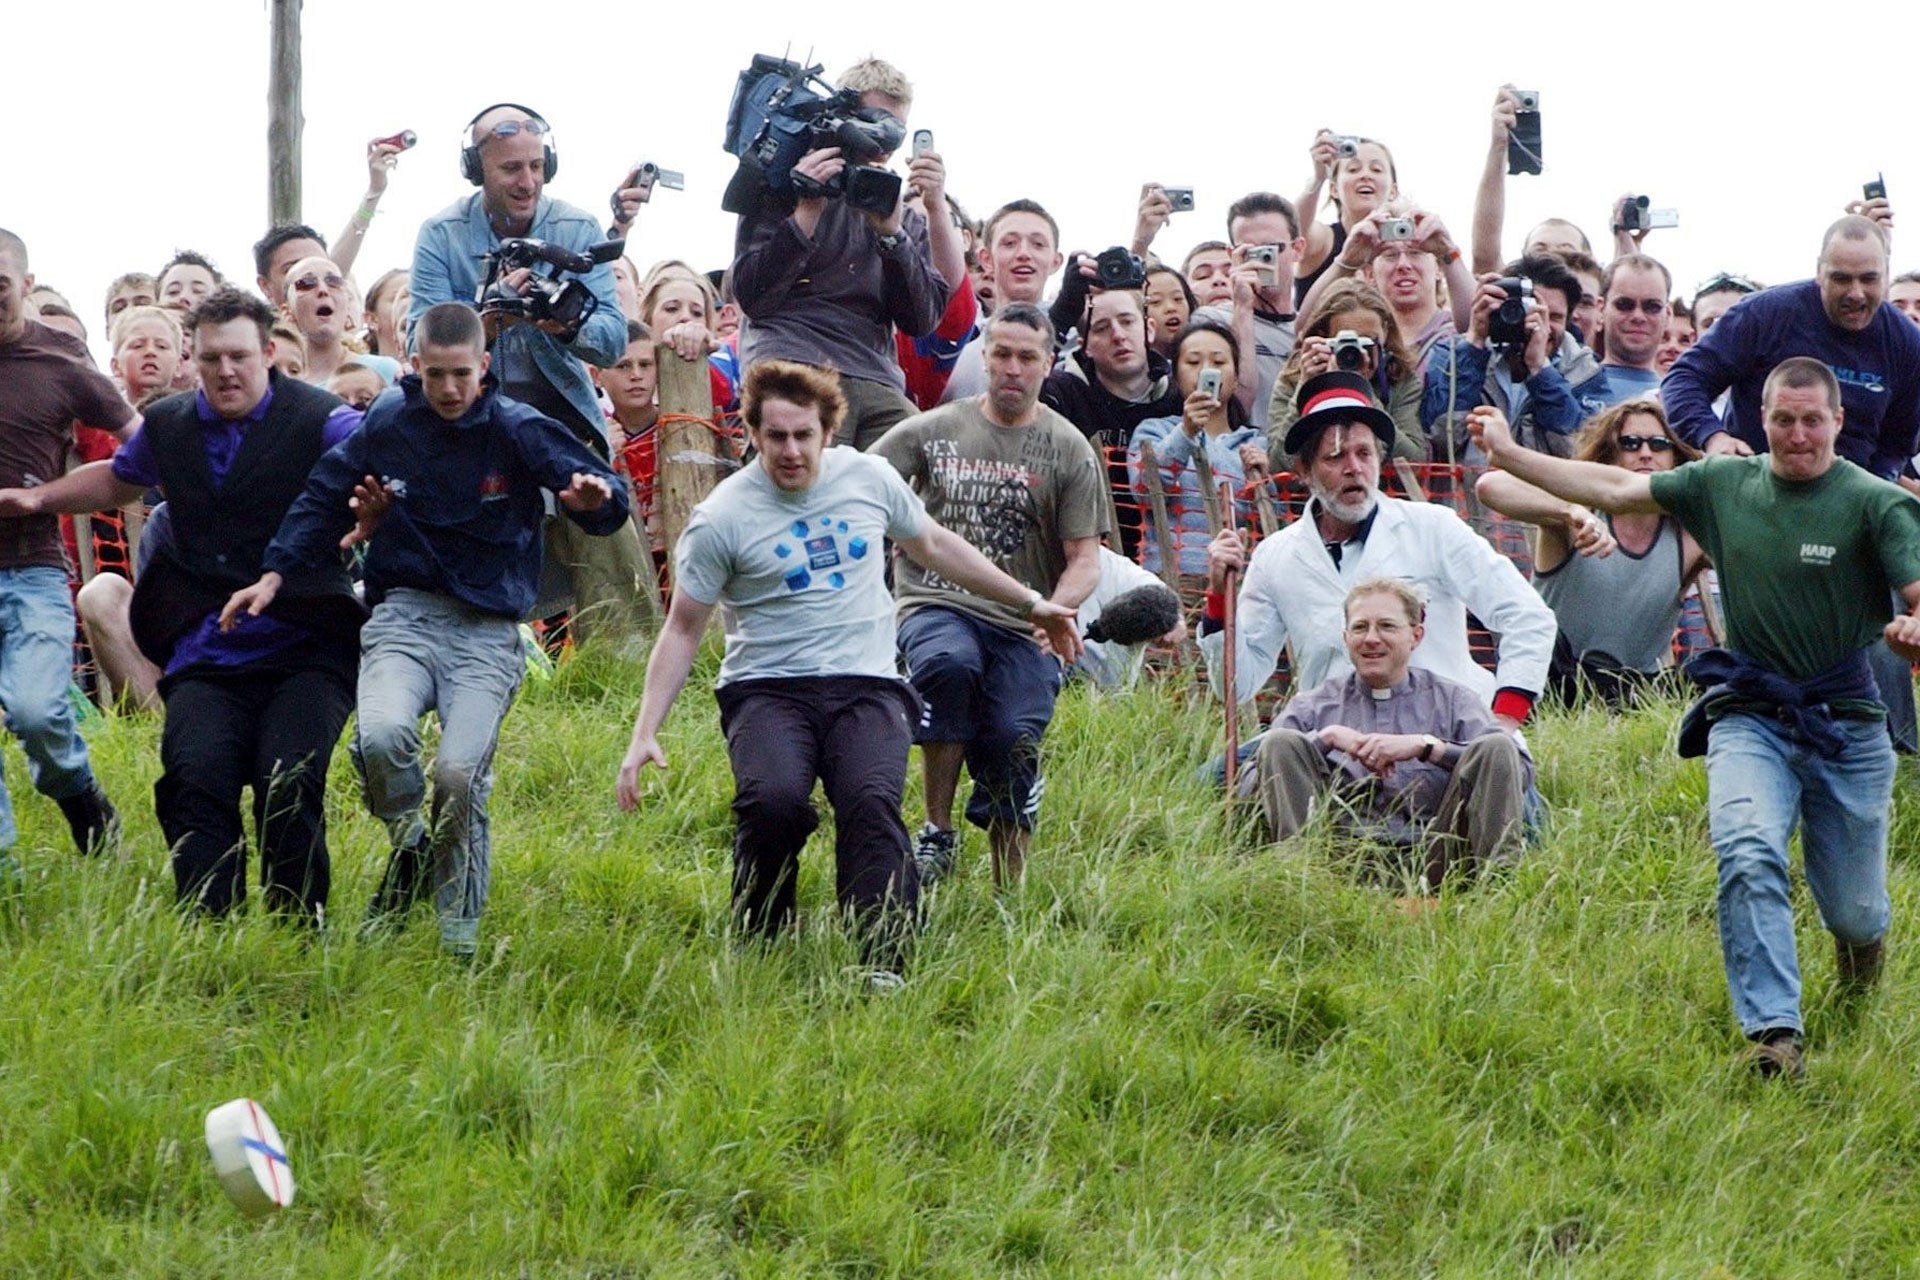 worlds quirkiest events cheese rolling